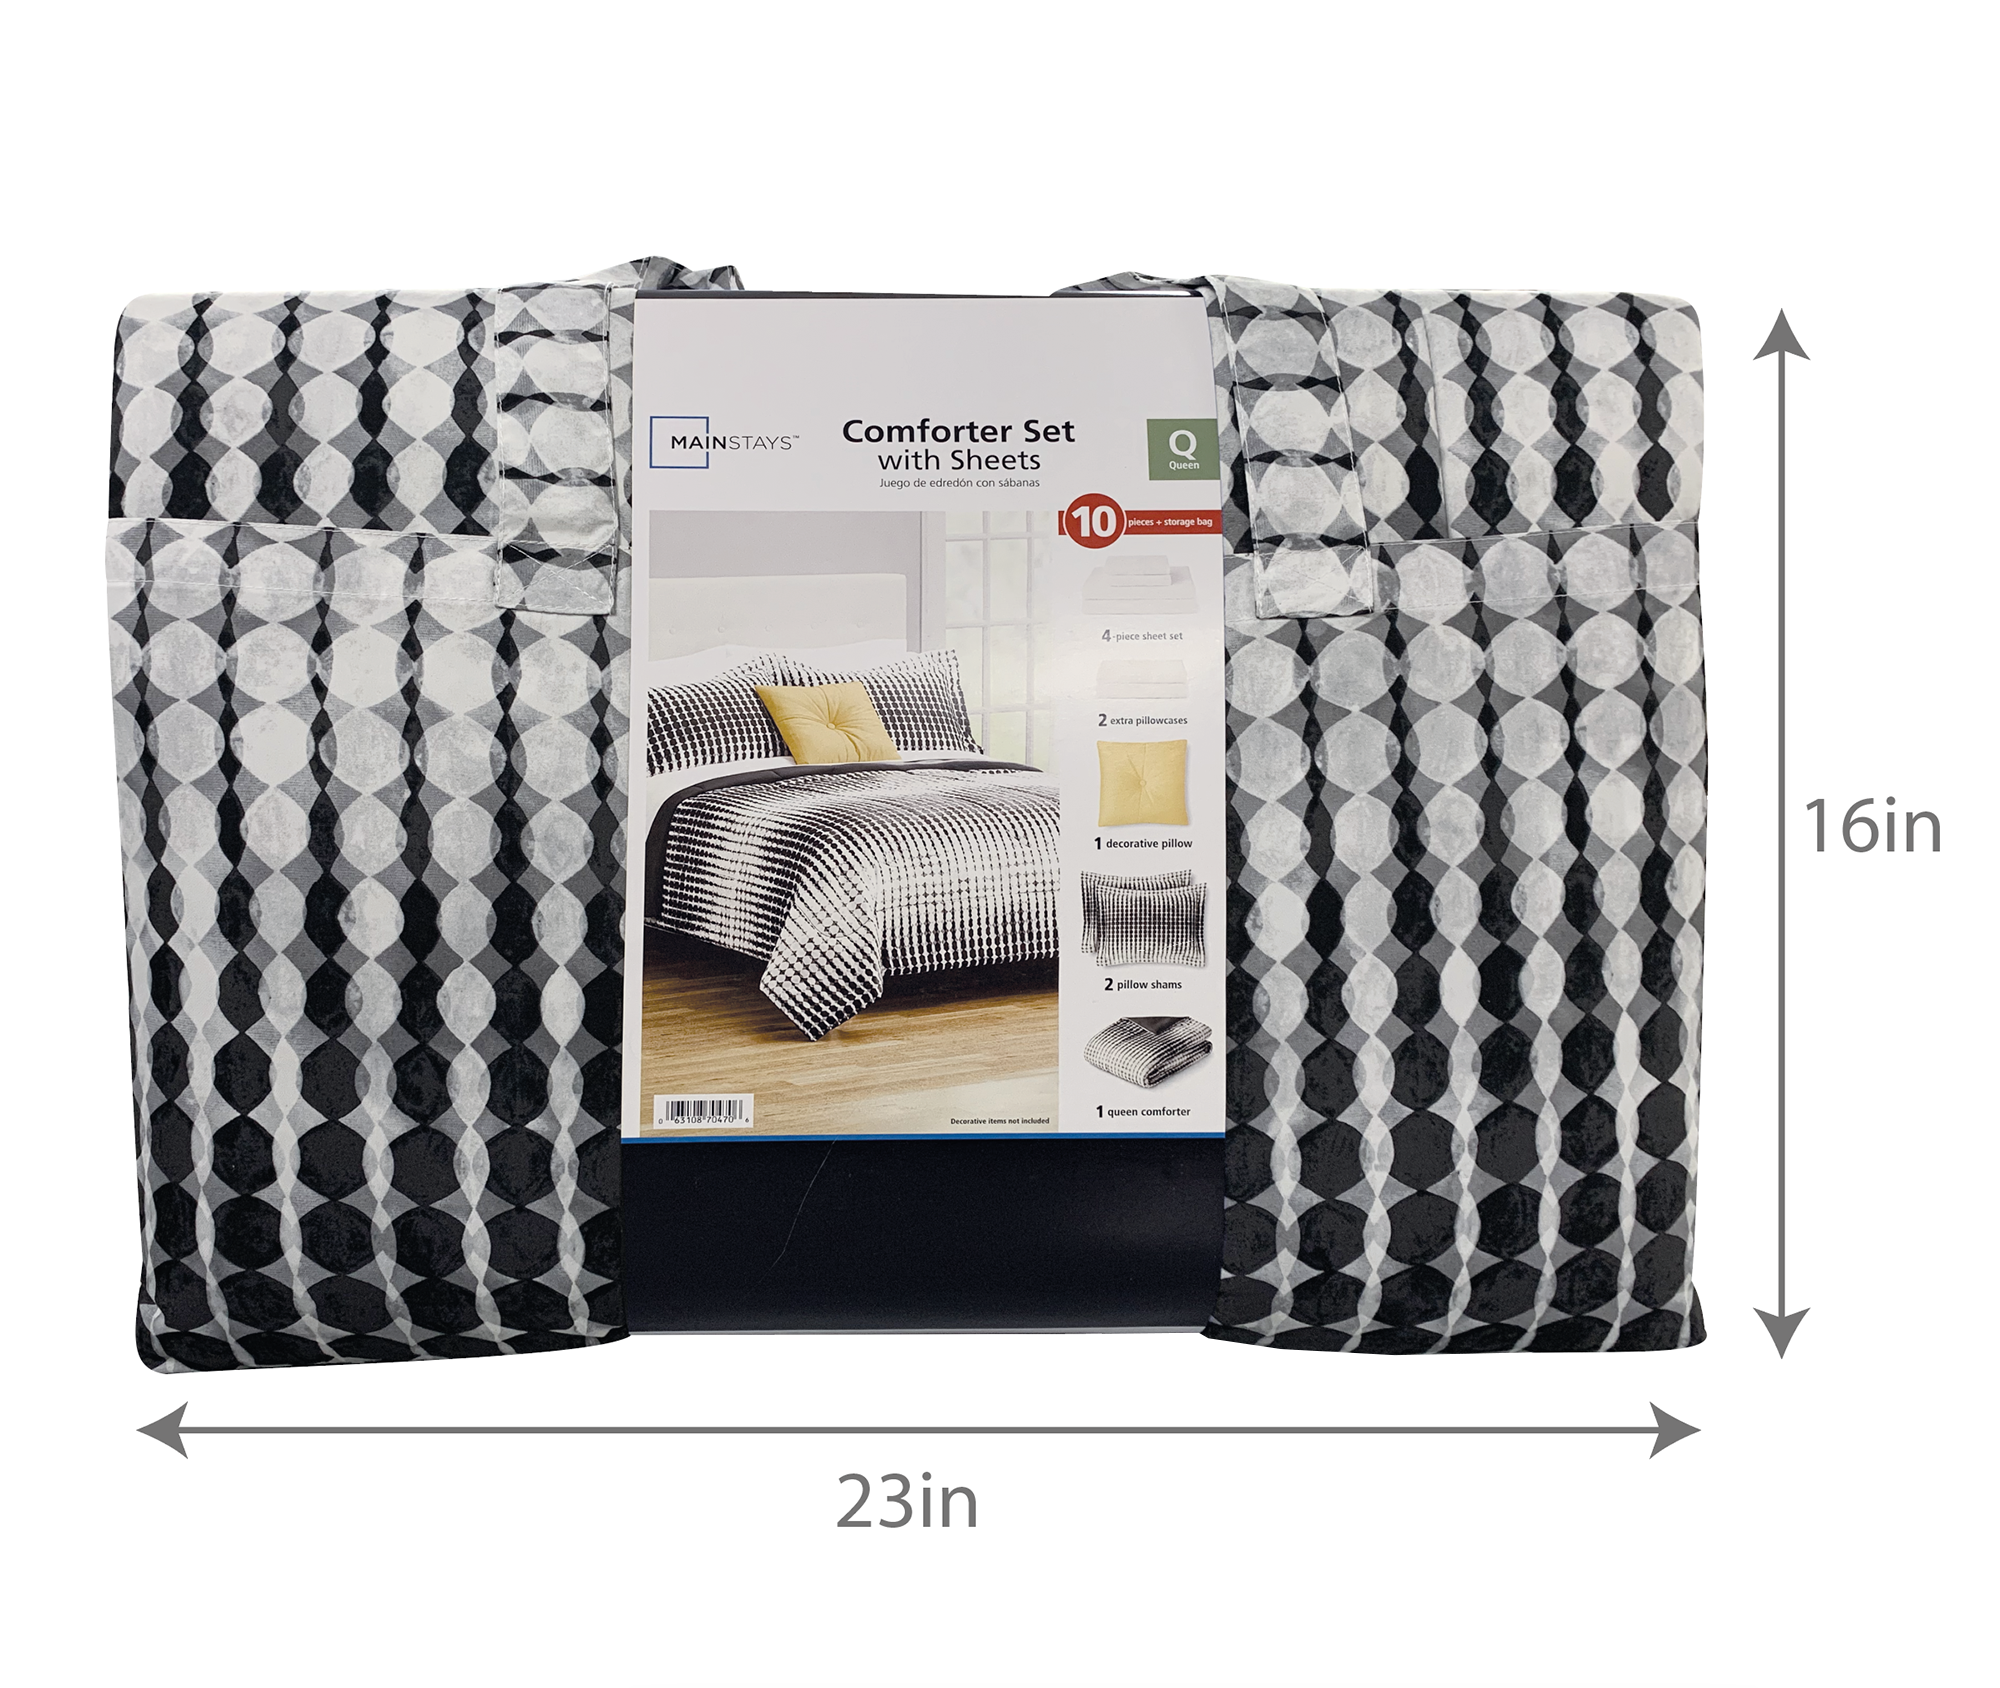 Mainstays Black and White Geo Stripe 10 Piece Bed in a Bag Comforter Set with Sheets, Queen - image 4 of 9